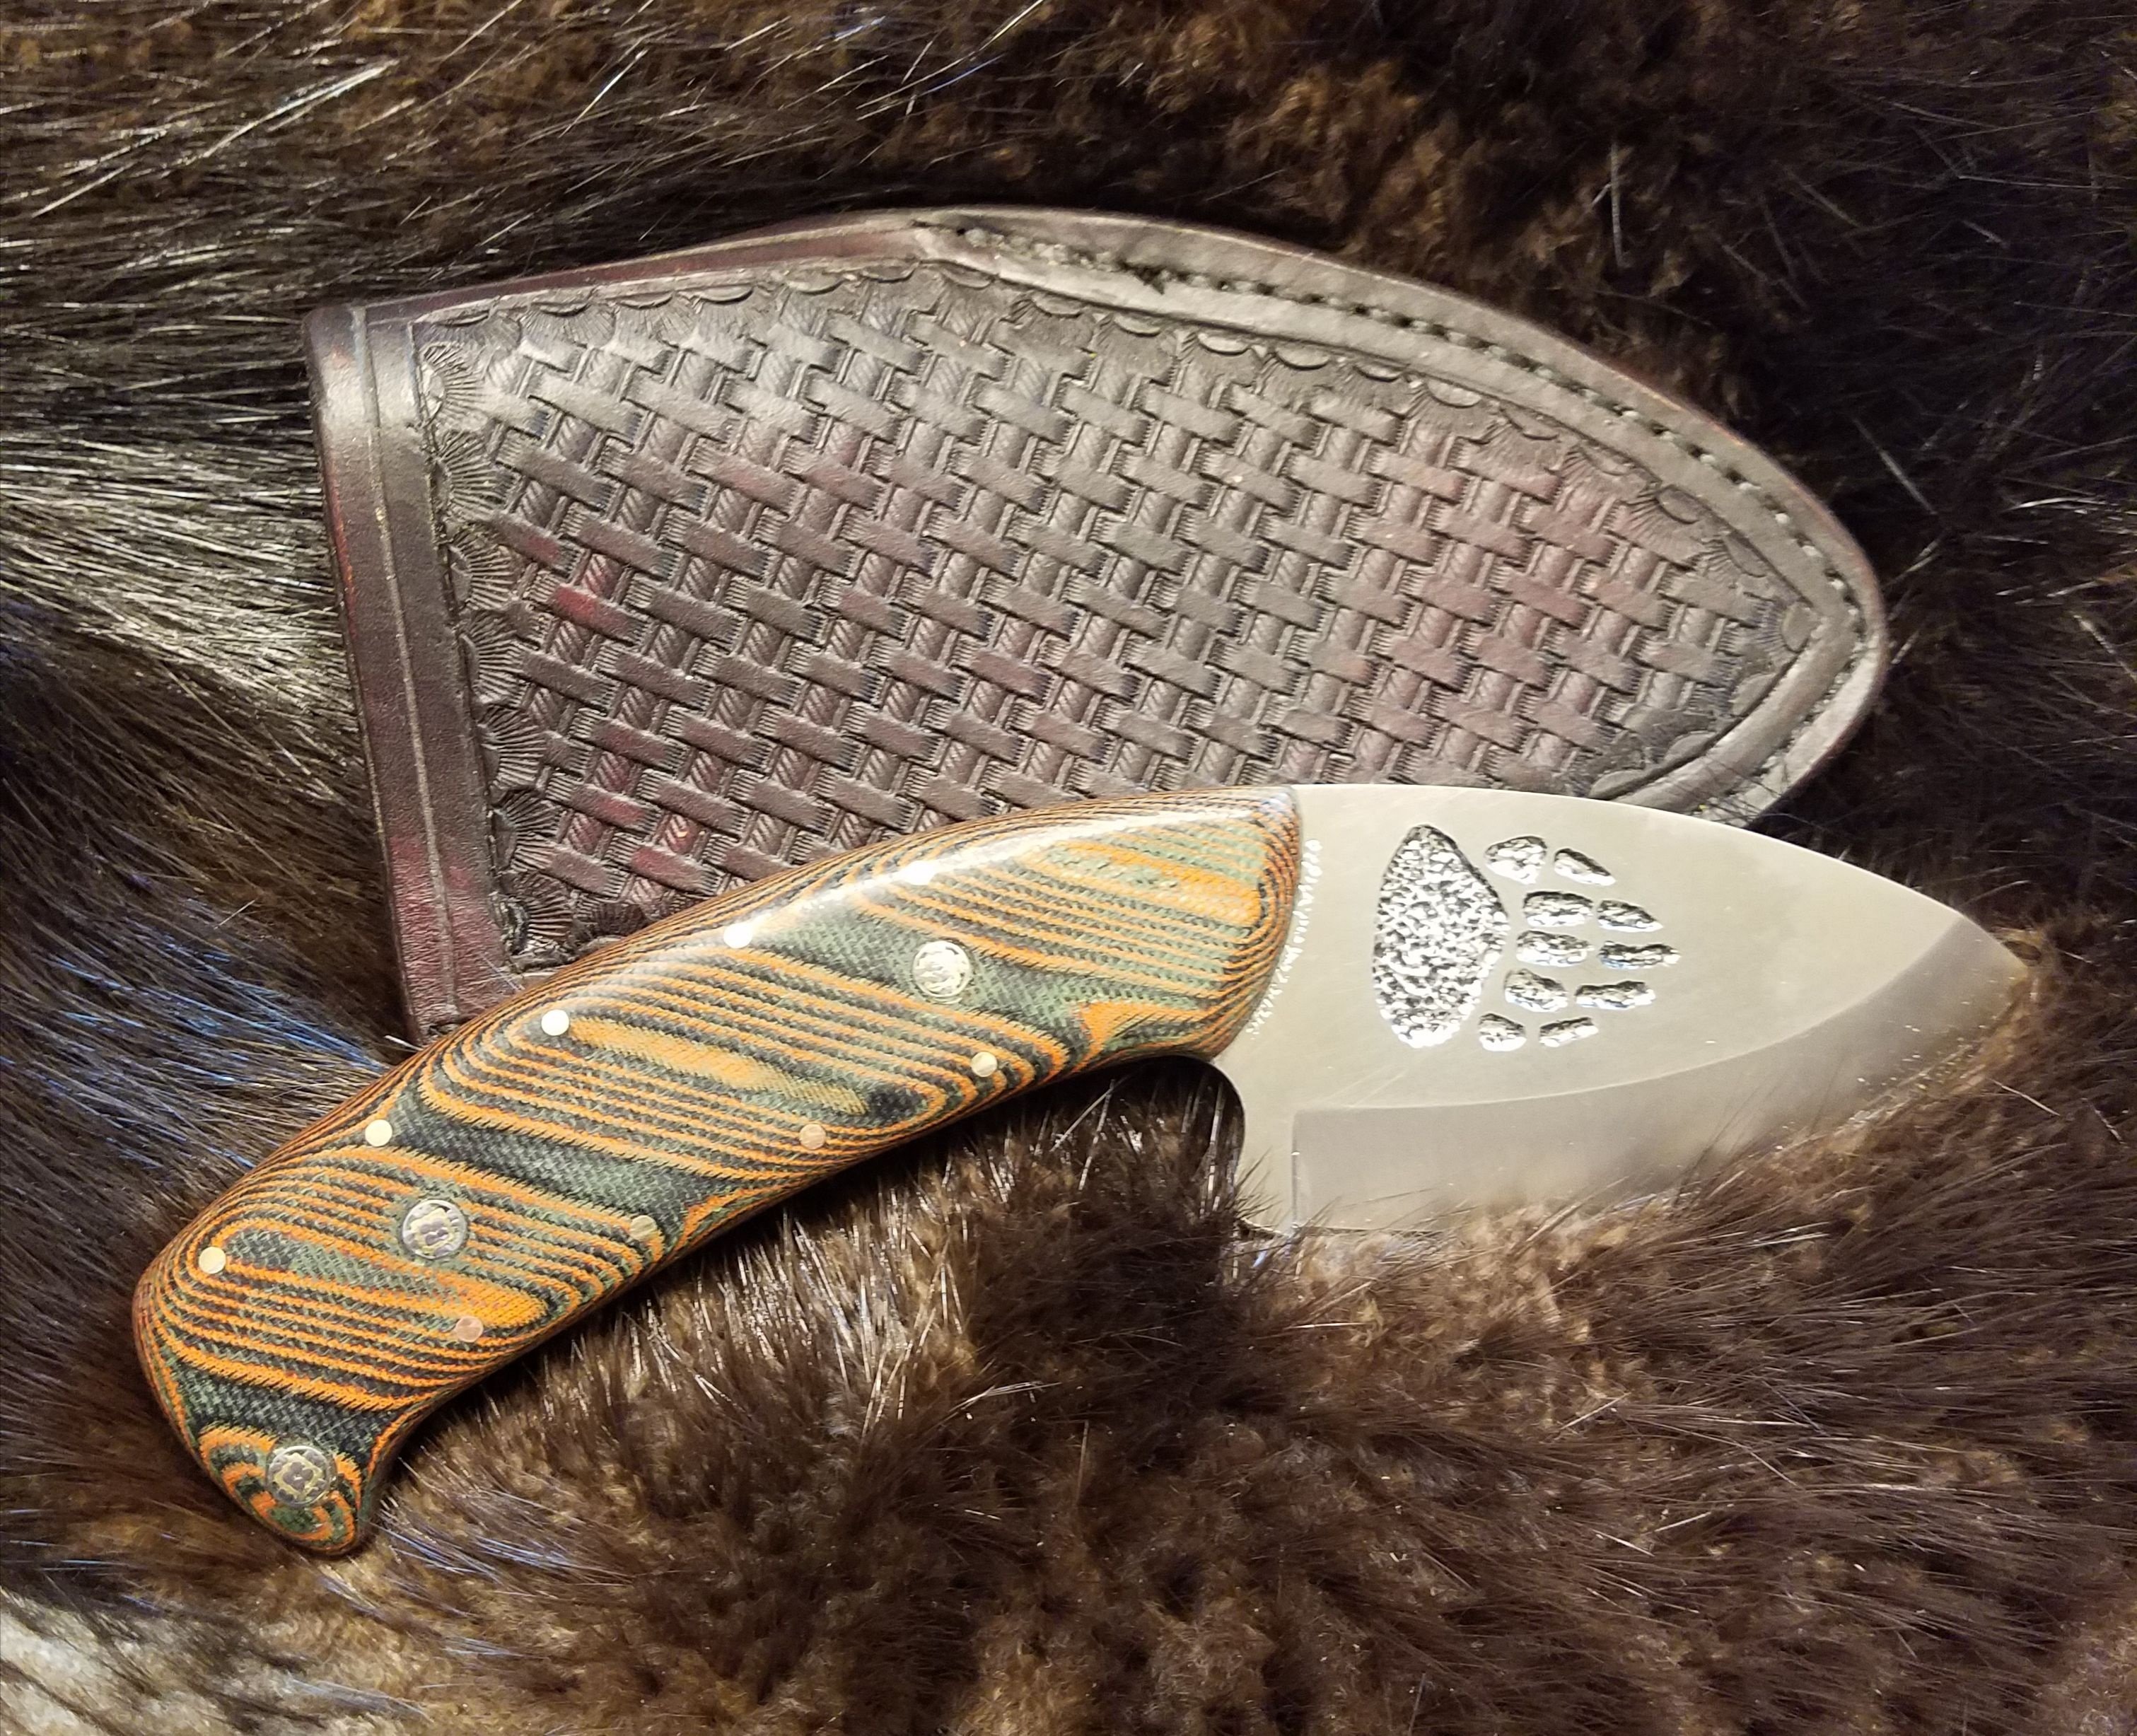 Grizzly Paw Engraved Skinner With Orange Dewcarta Handle, Hand Tooled, Hand Stitched Leather Sheath,   $180.00